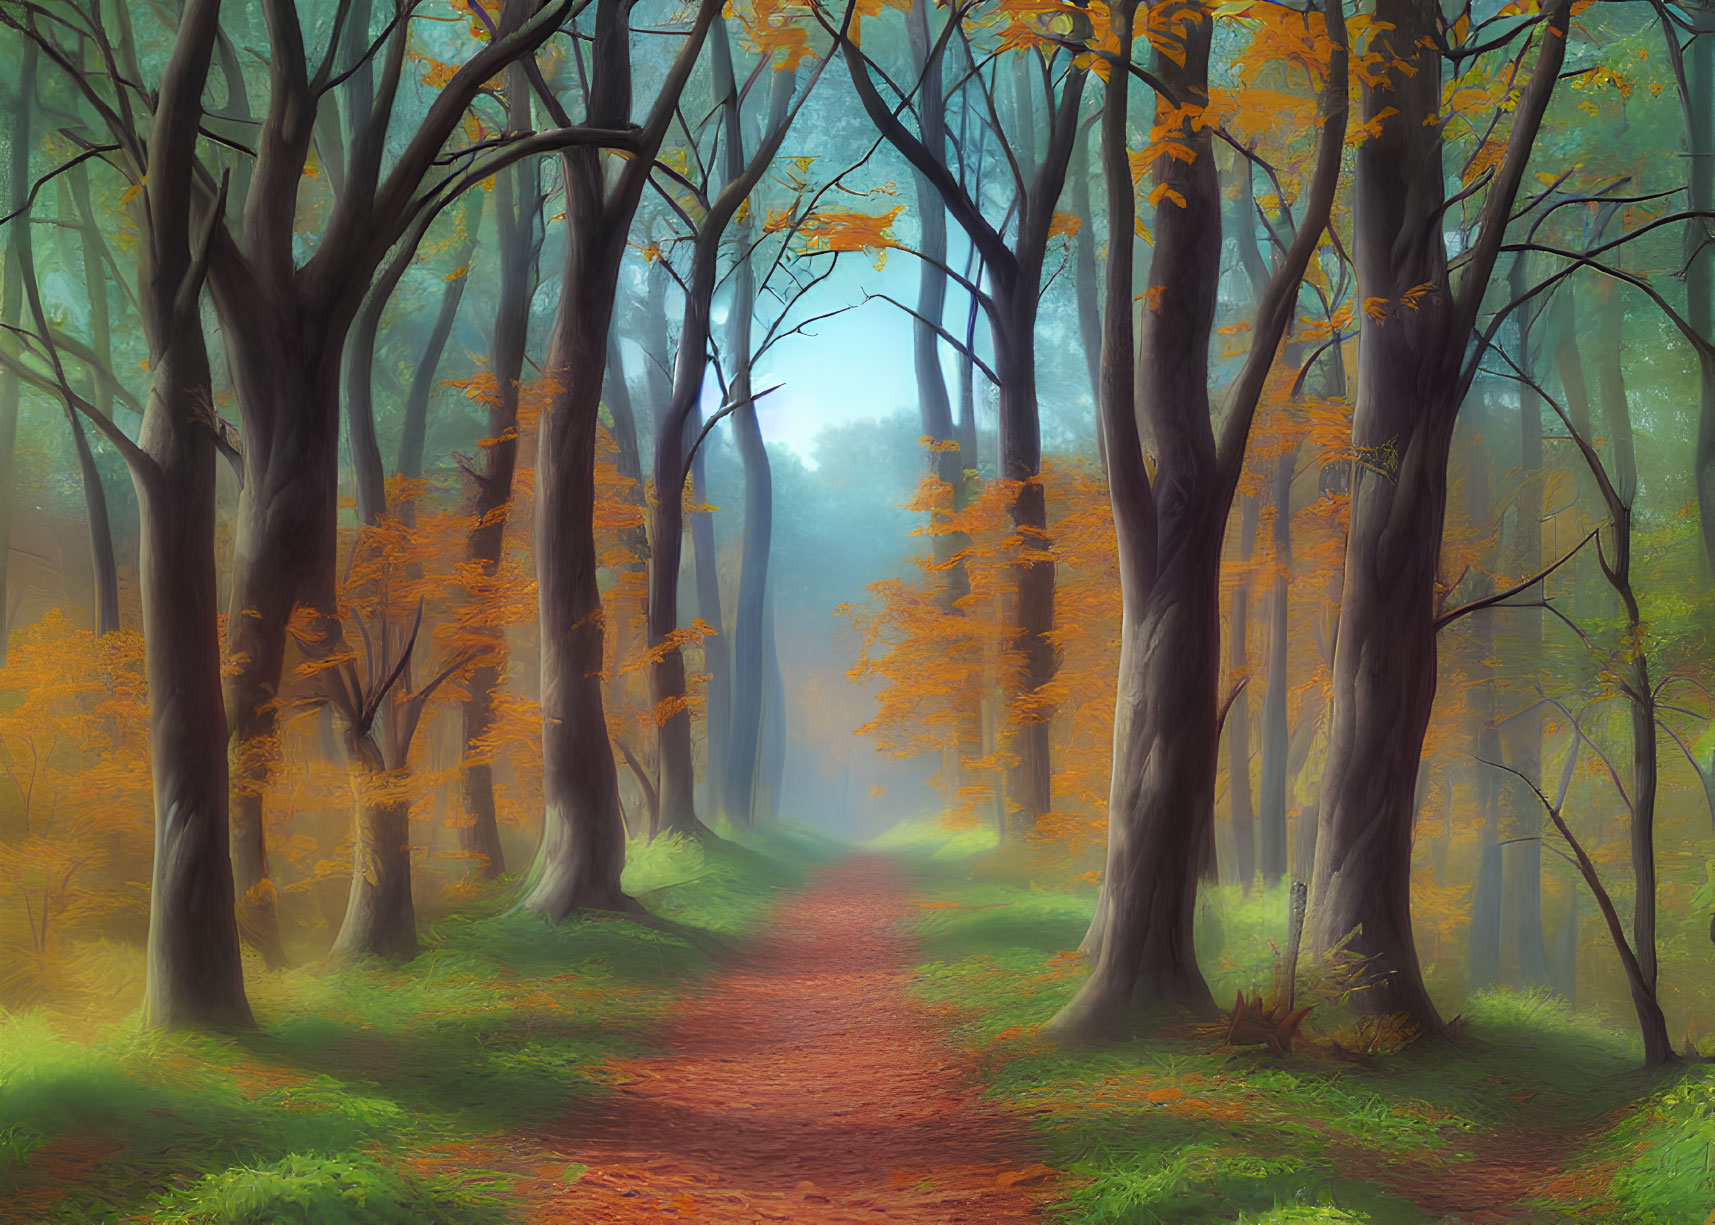 Tranquil forest path with tall trees and golden leaves in soft, misty light